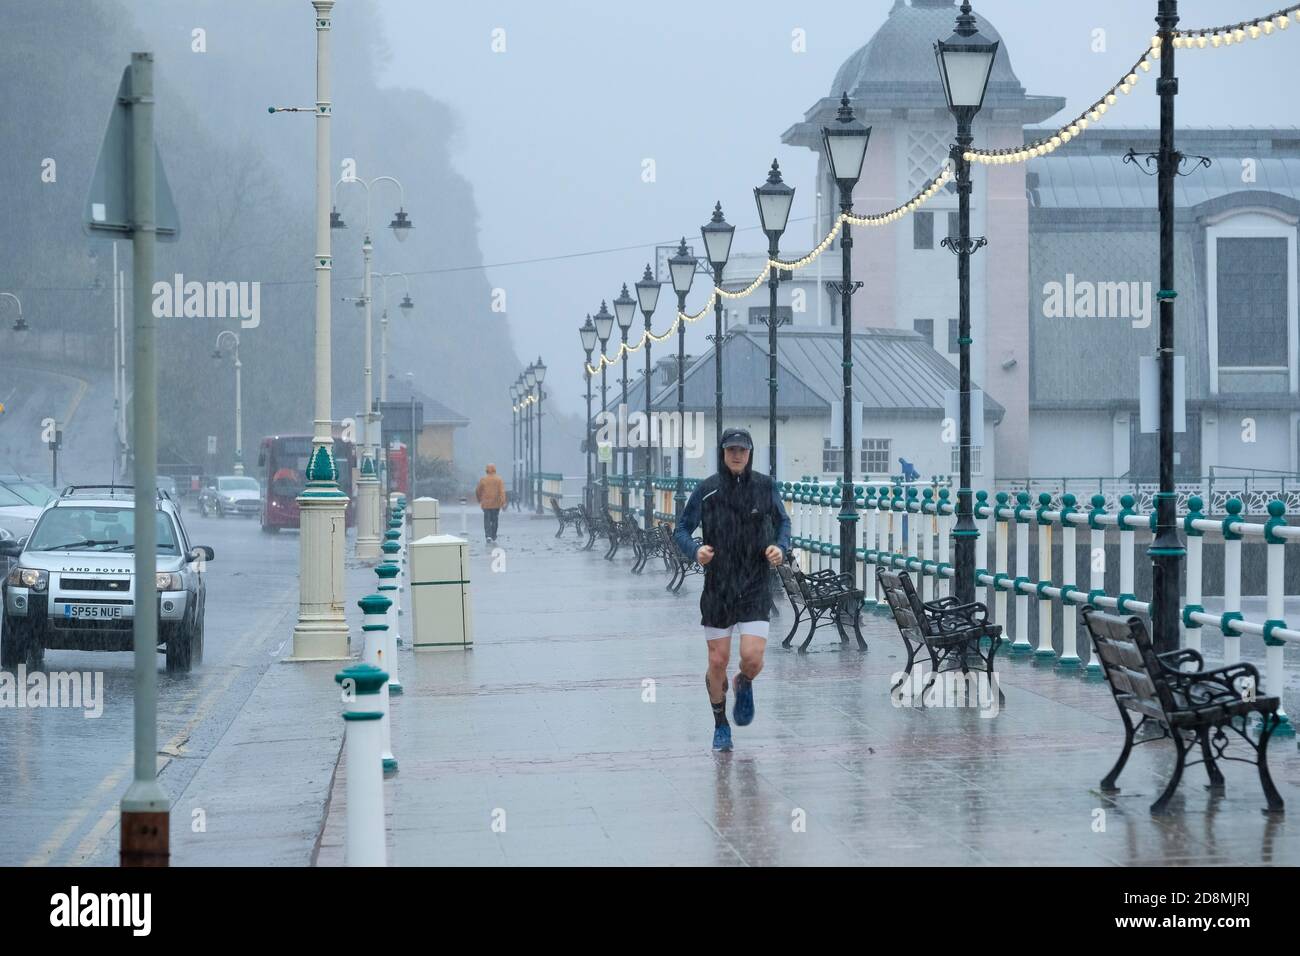 Stormy weather - Penarth, Wales UK. 31st October 2020.  The Met Office has issues a Yellow weather warning as storm Aiden batters the UK. A lone runner battles the wind and rain on Penarth sea front. Stock Photo